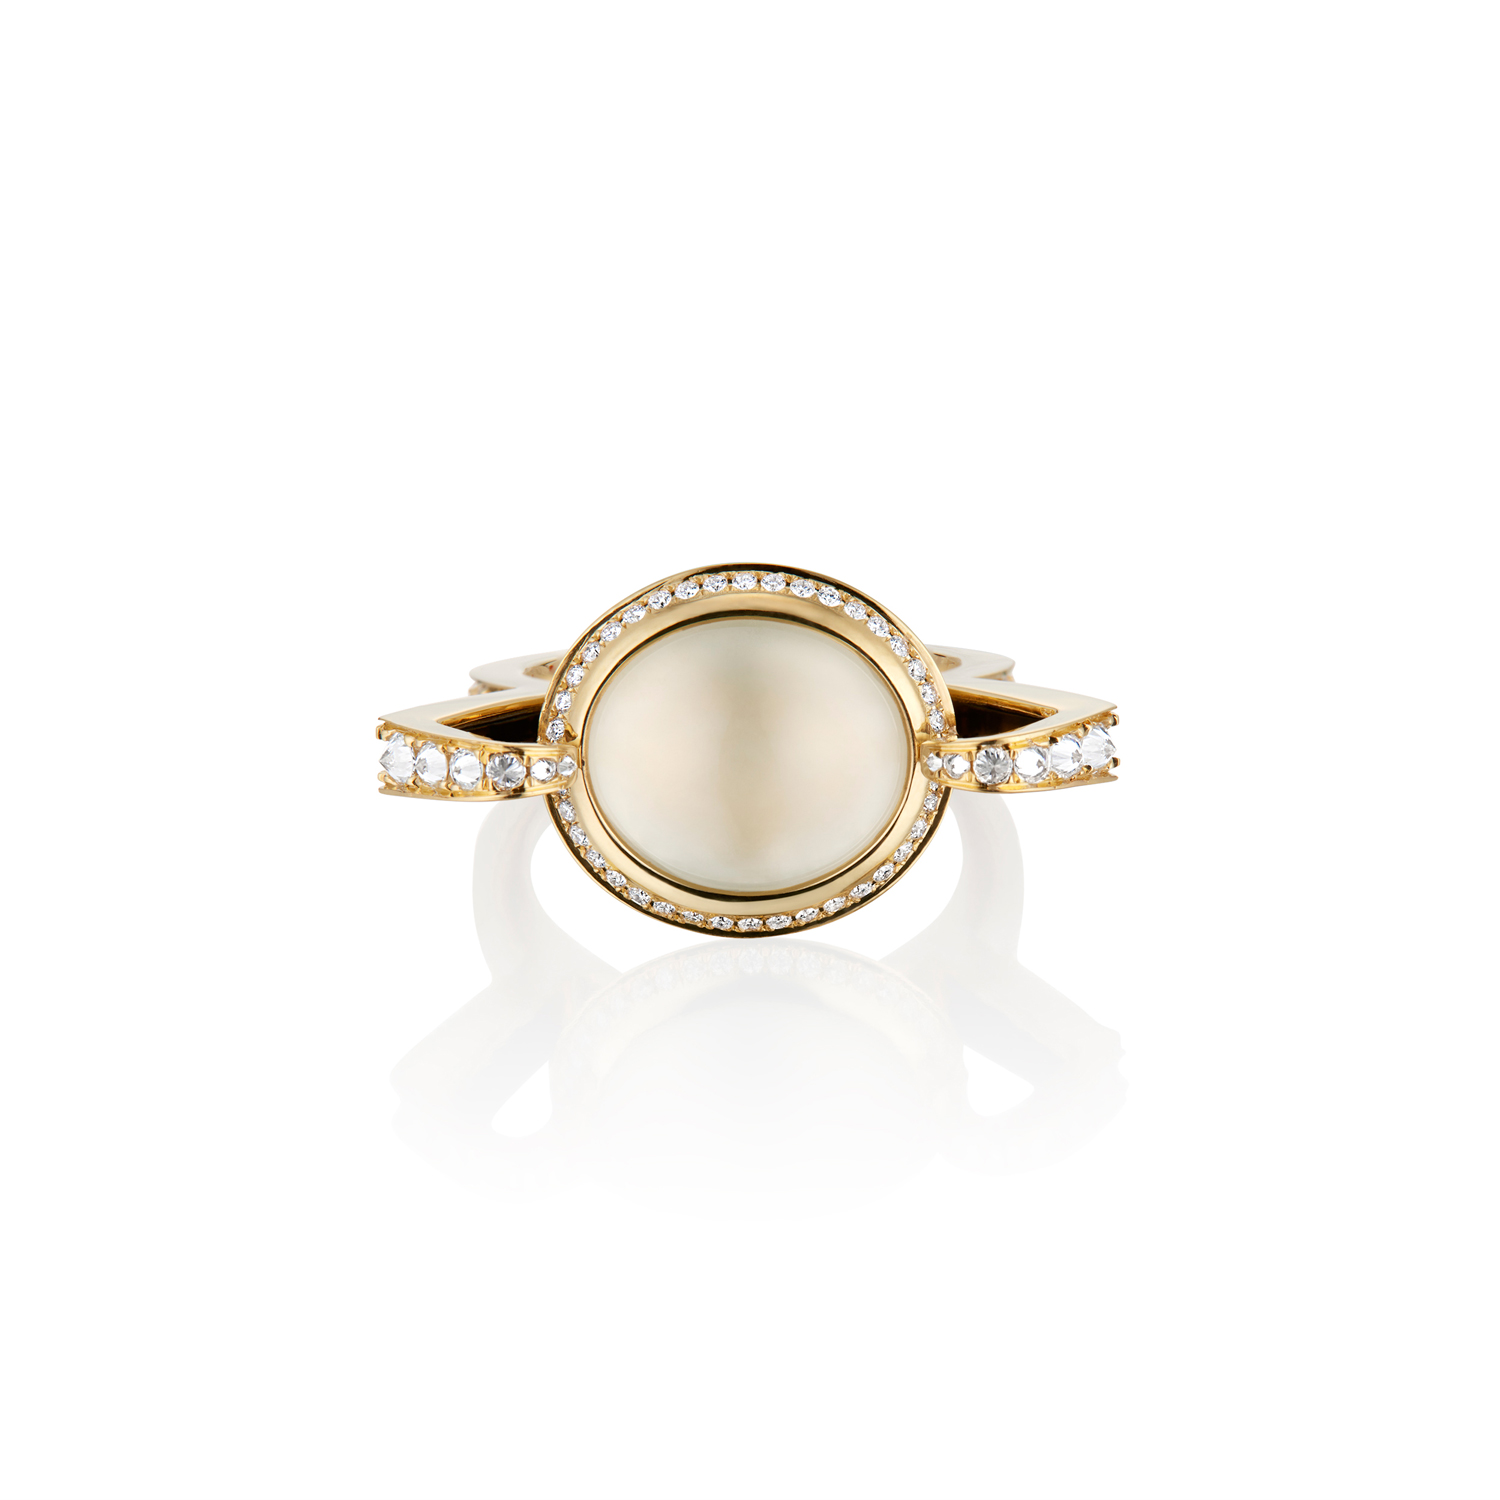 This is an overhead view of the Renisis Reservoir Ice Ring by artist Sardwell. It is crafted in 18k yellow gold with inverted diamonds and a translucent ice jade center. Its setting is high and dramatic.